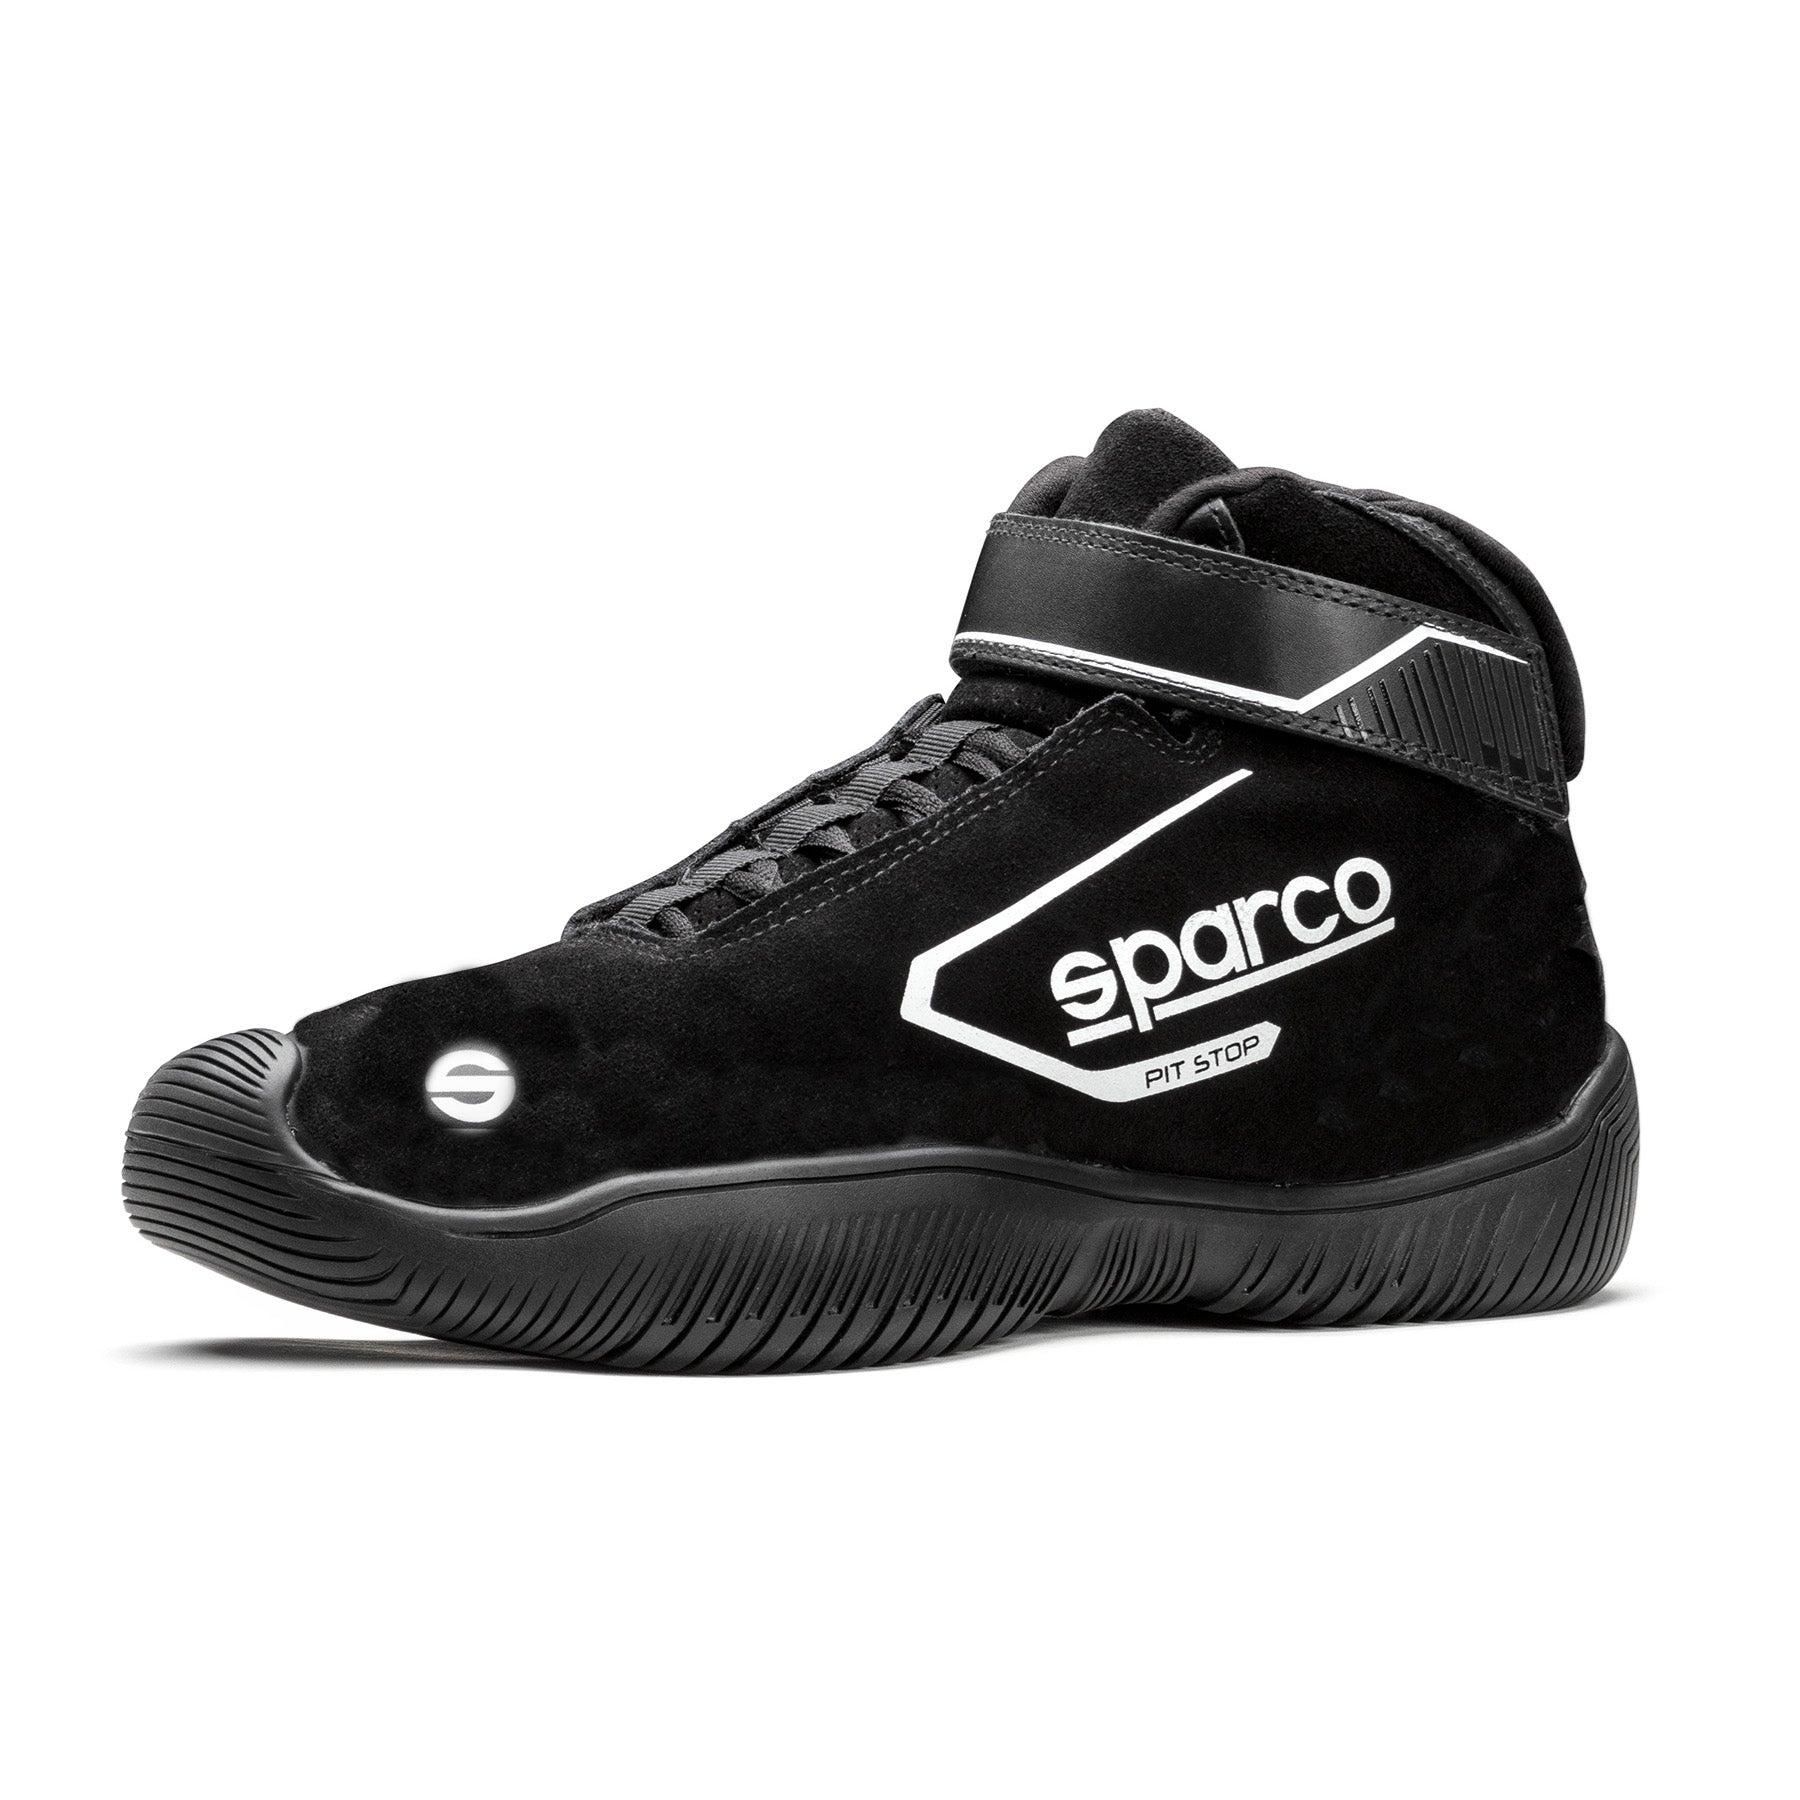 Sparco Pit Stop 2 Crew Shoes - 24 Hours of Lemons